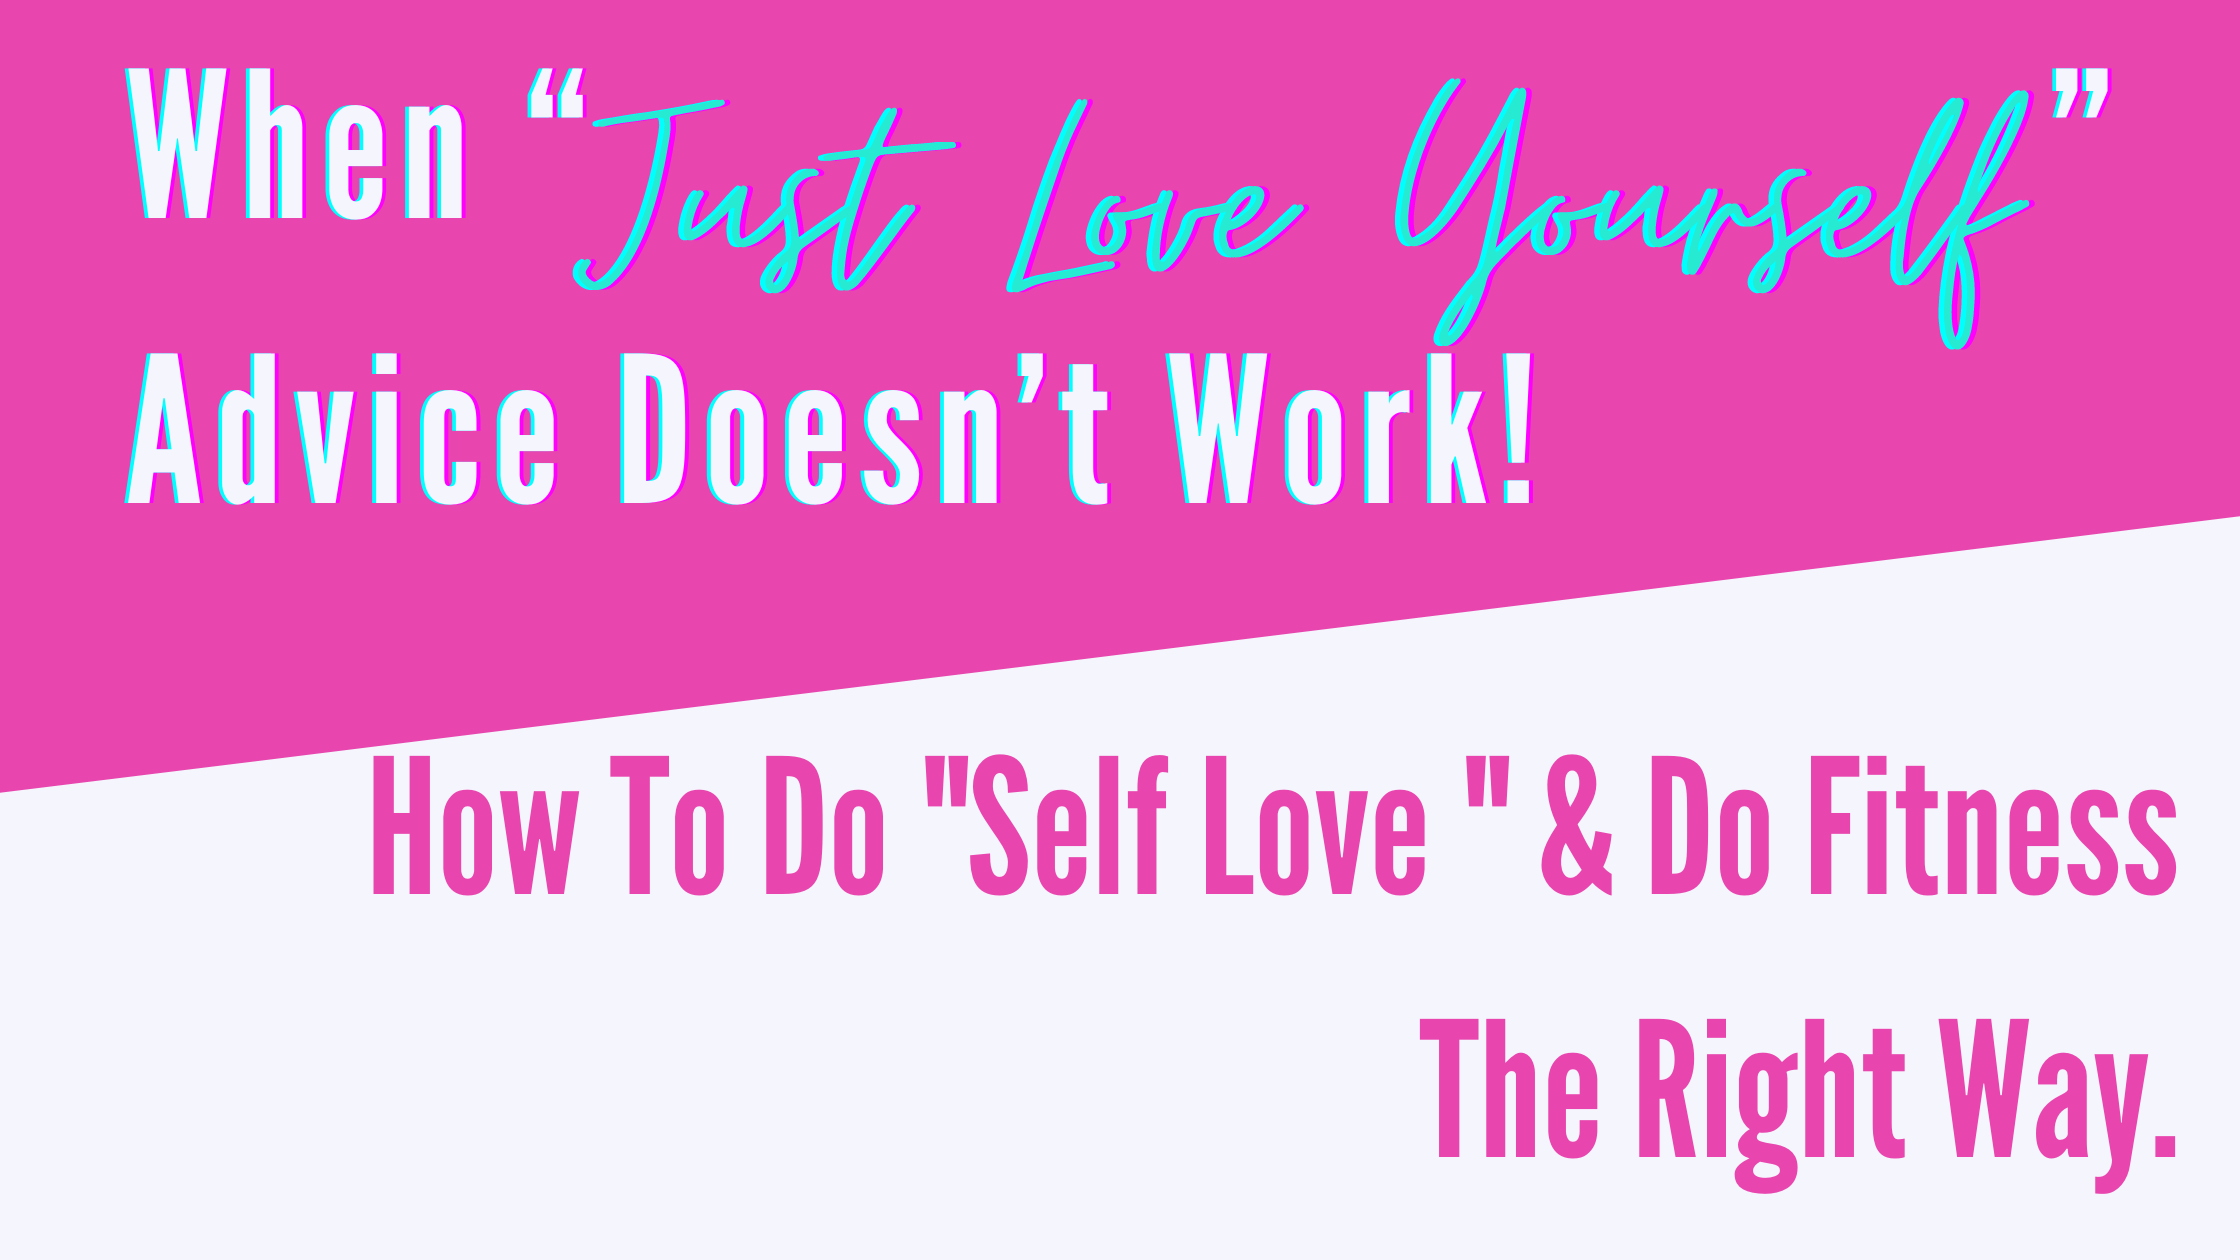 When JUST “Love yourself” Advice Doesn’t Work! How To Do "Self Love " & Do Fitness The Right Way.